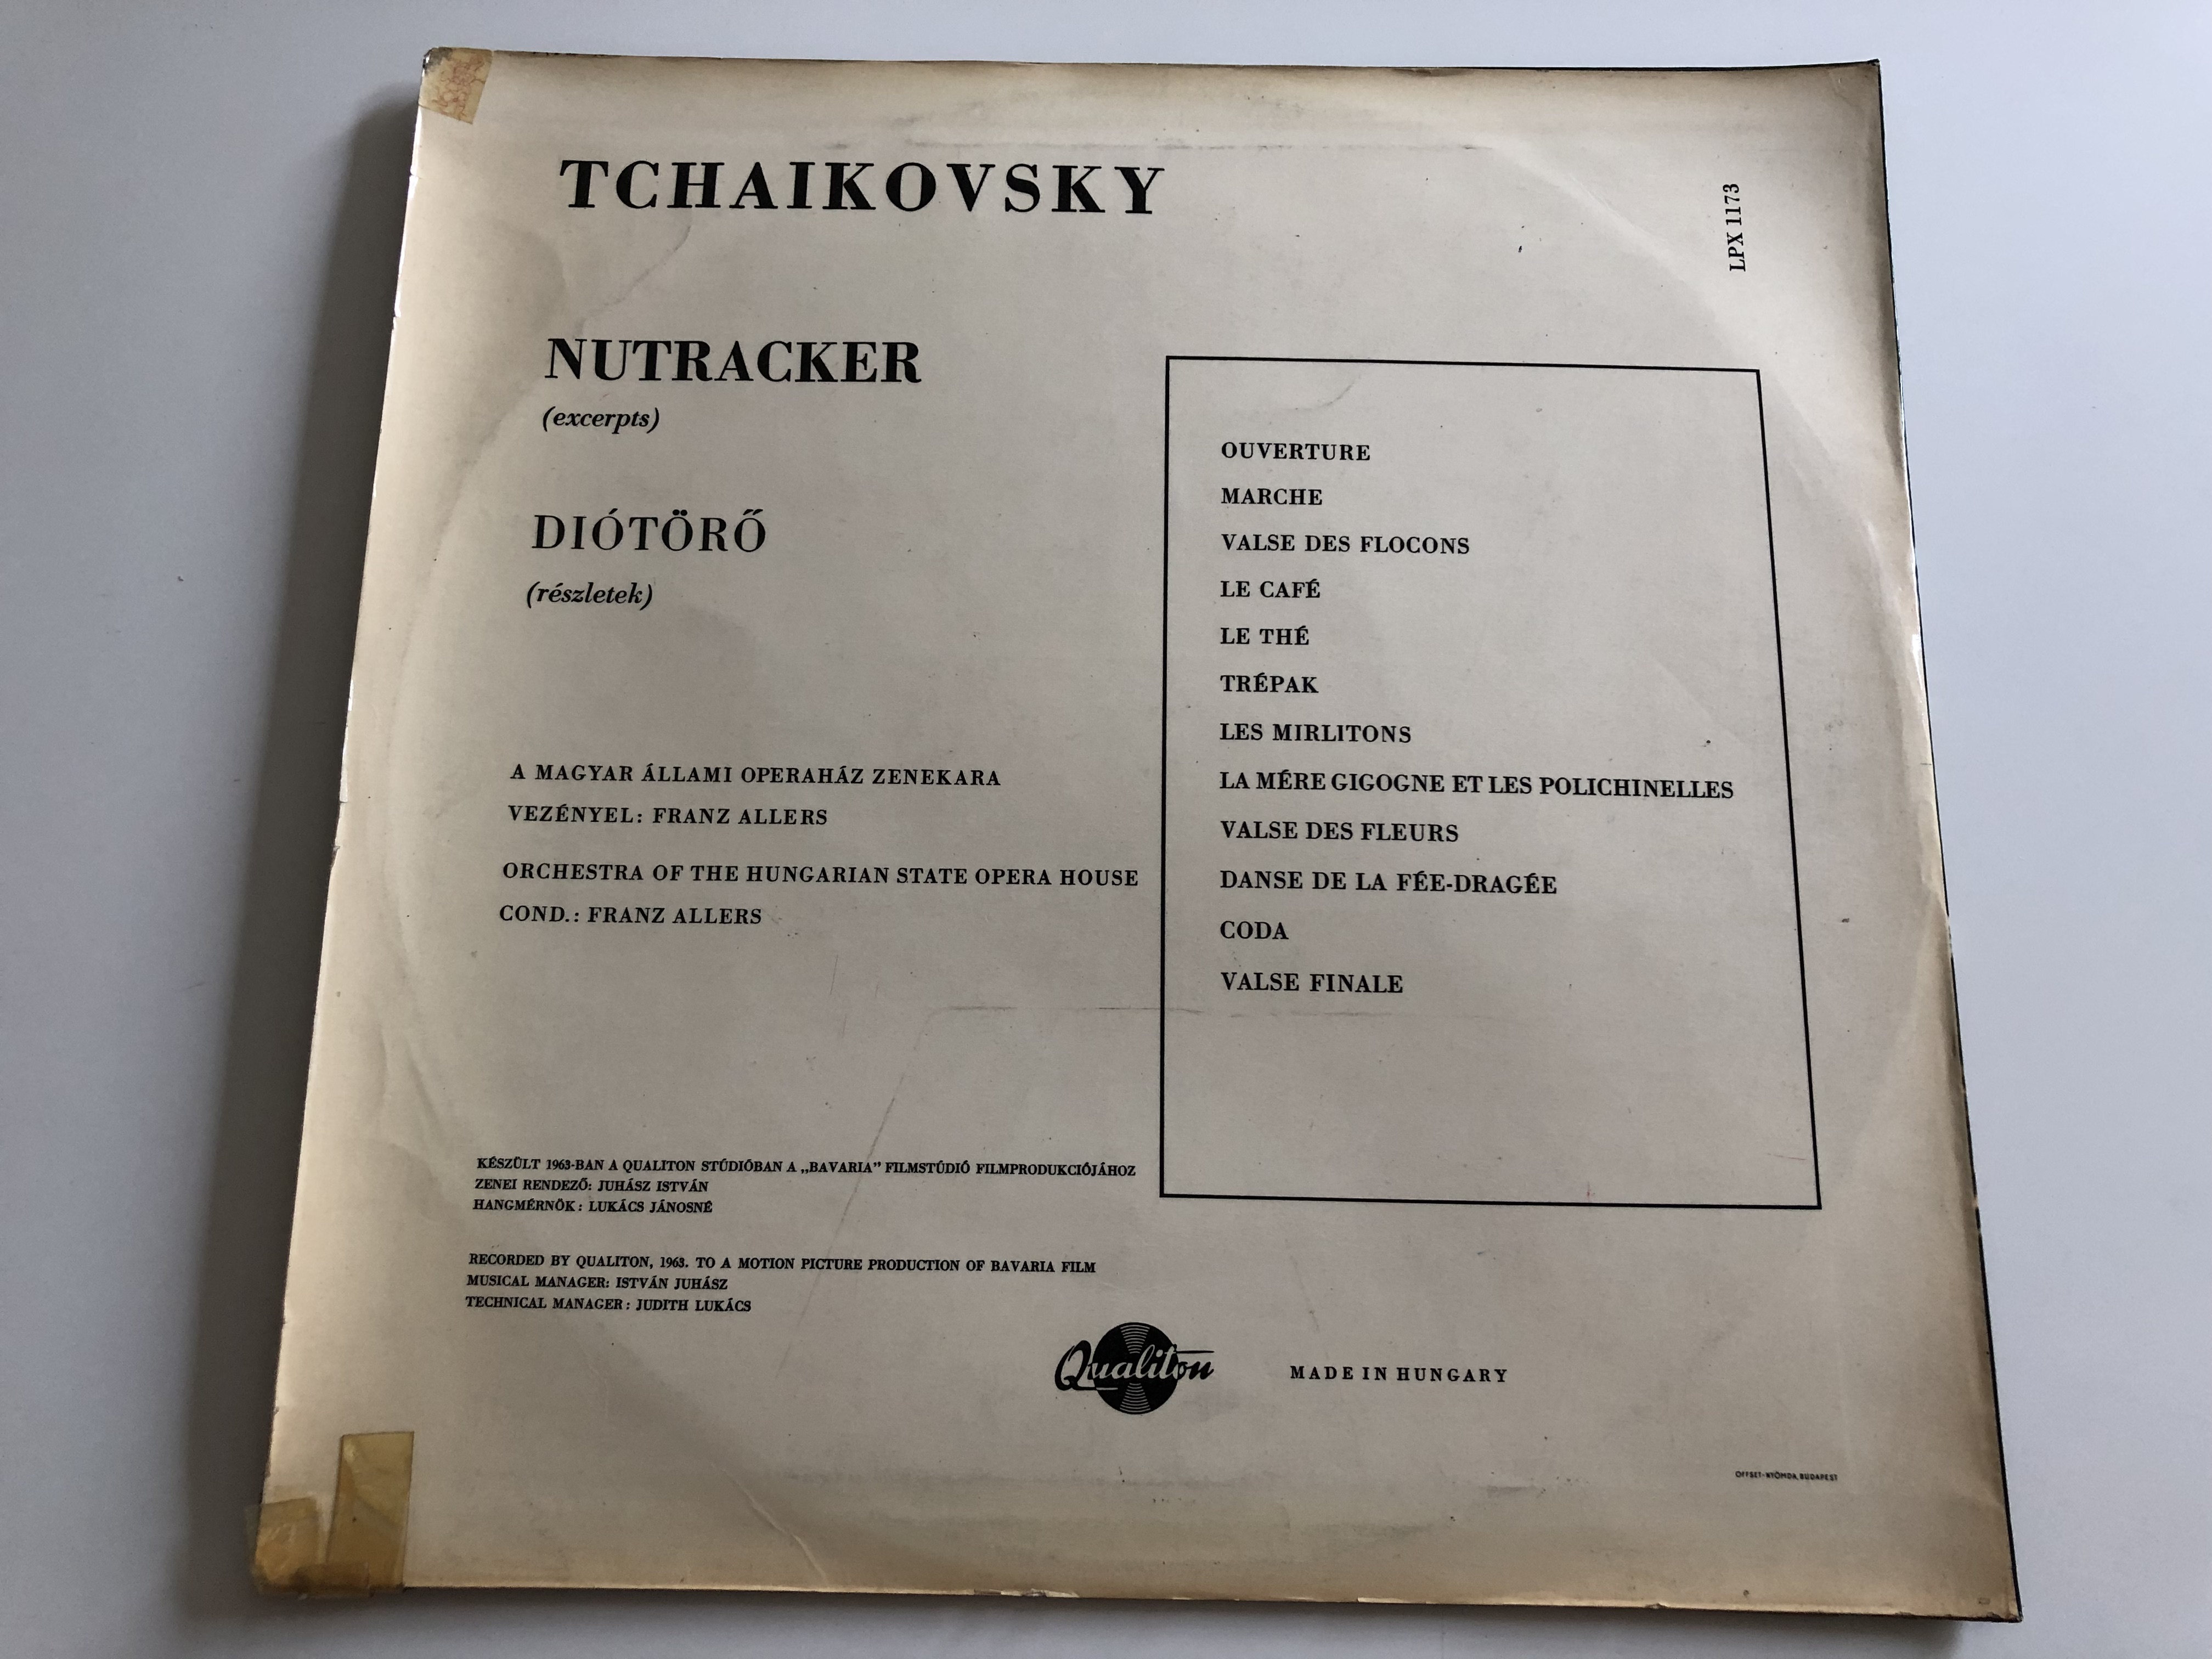 tchaikovsky-di-t-r-r-szletek-nutcracker-excerpts-orchestra-of-the-hungarian-state-opera-house-conducted-franz-allers-qualiton-lp-lpx-1173-2-.jpg